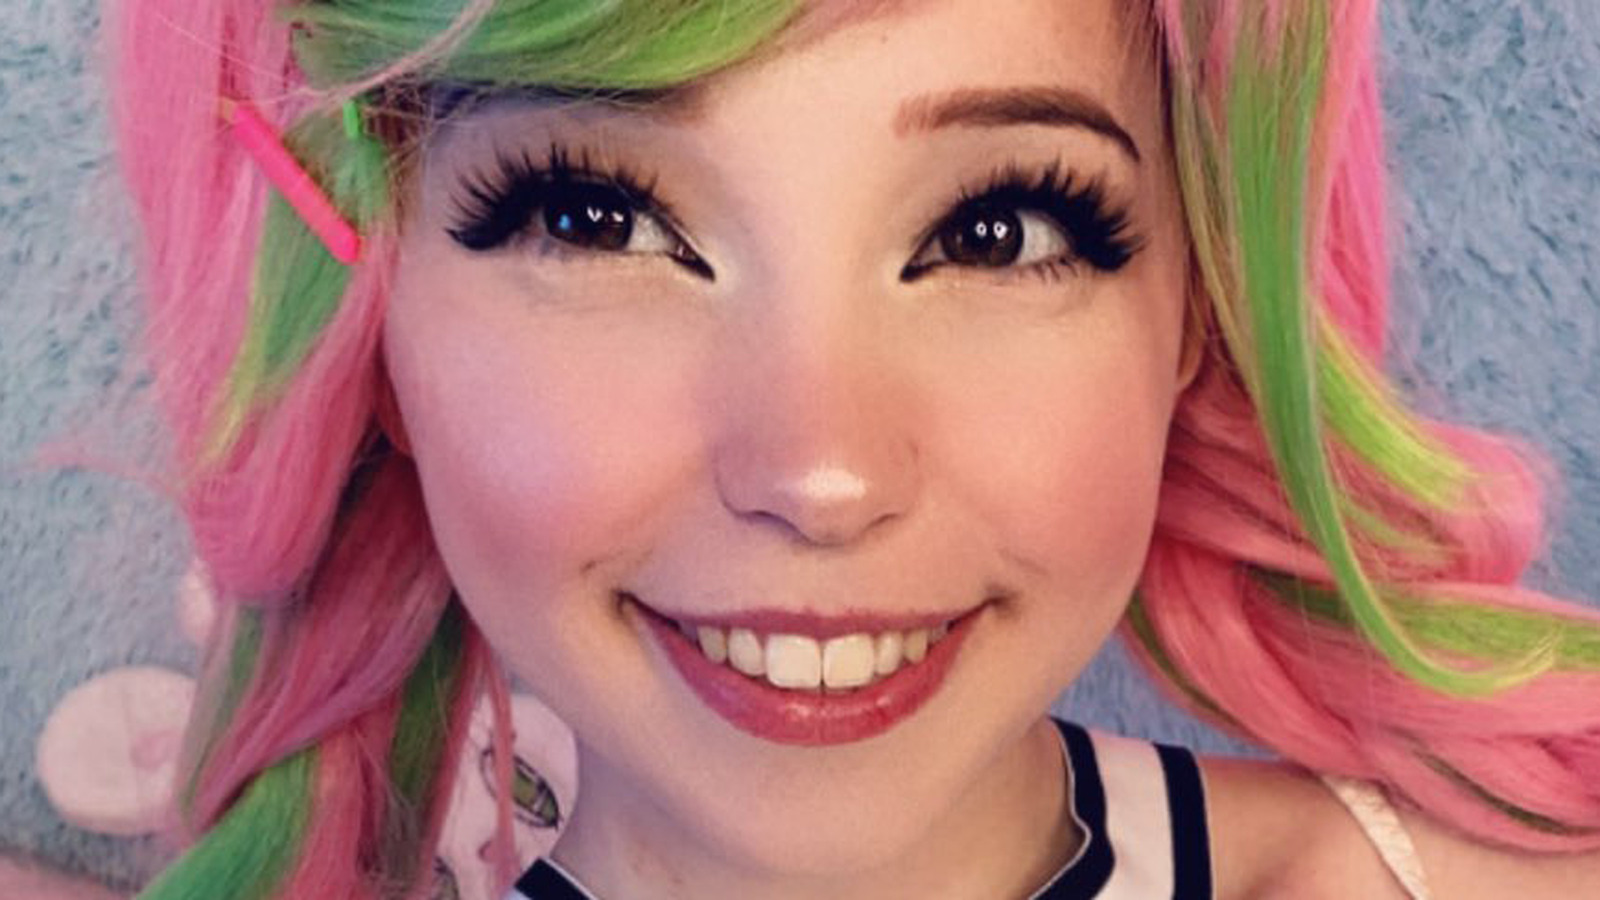 Delphine belle disappear did why 'Gamer Girl'